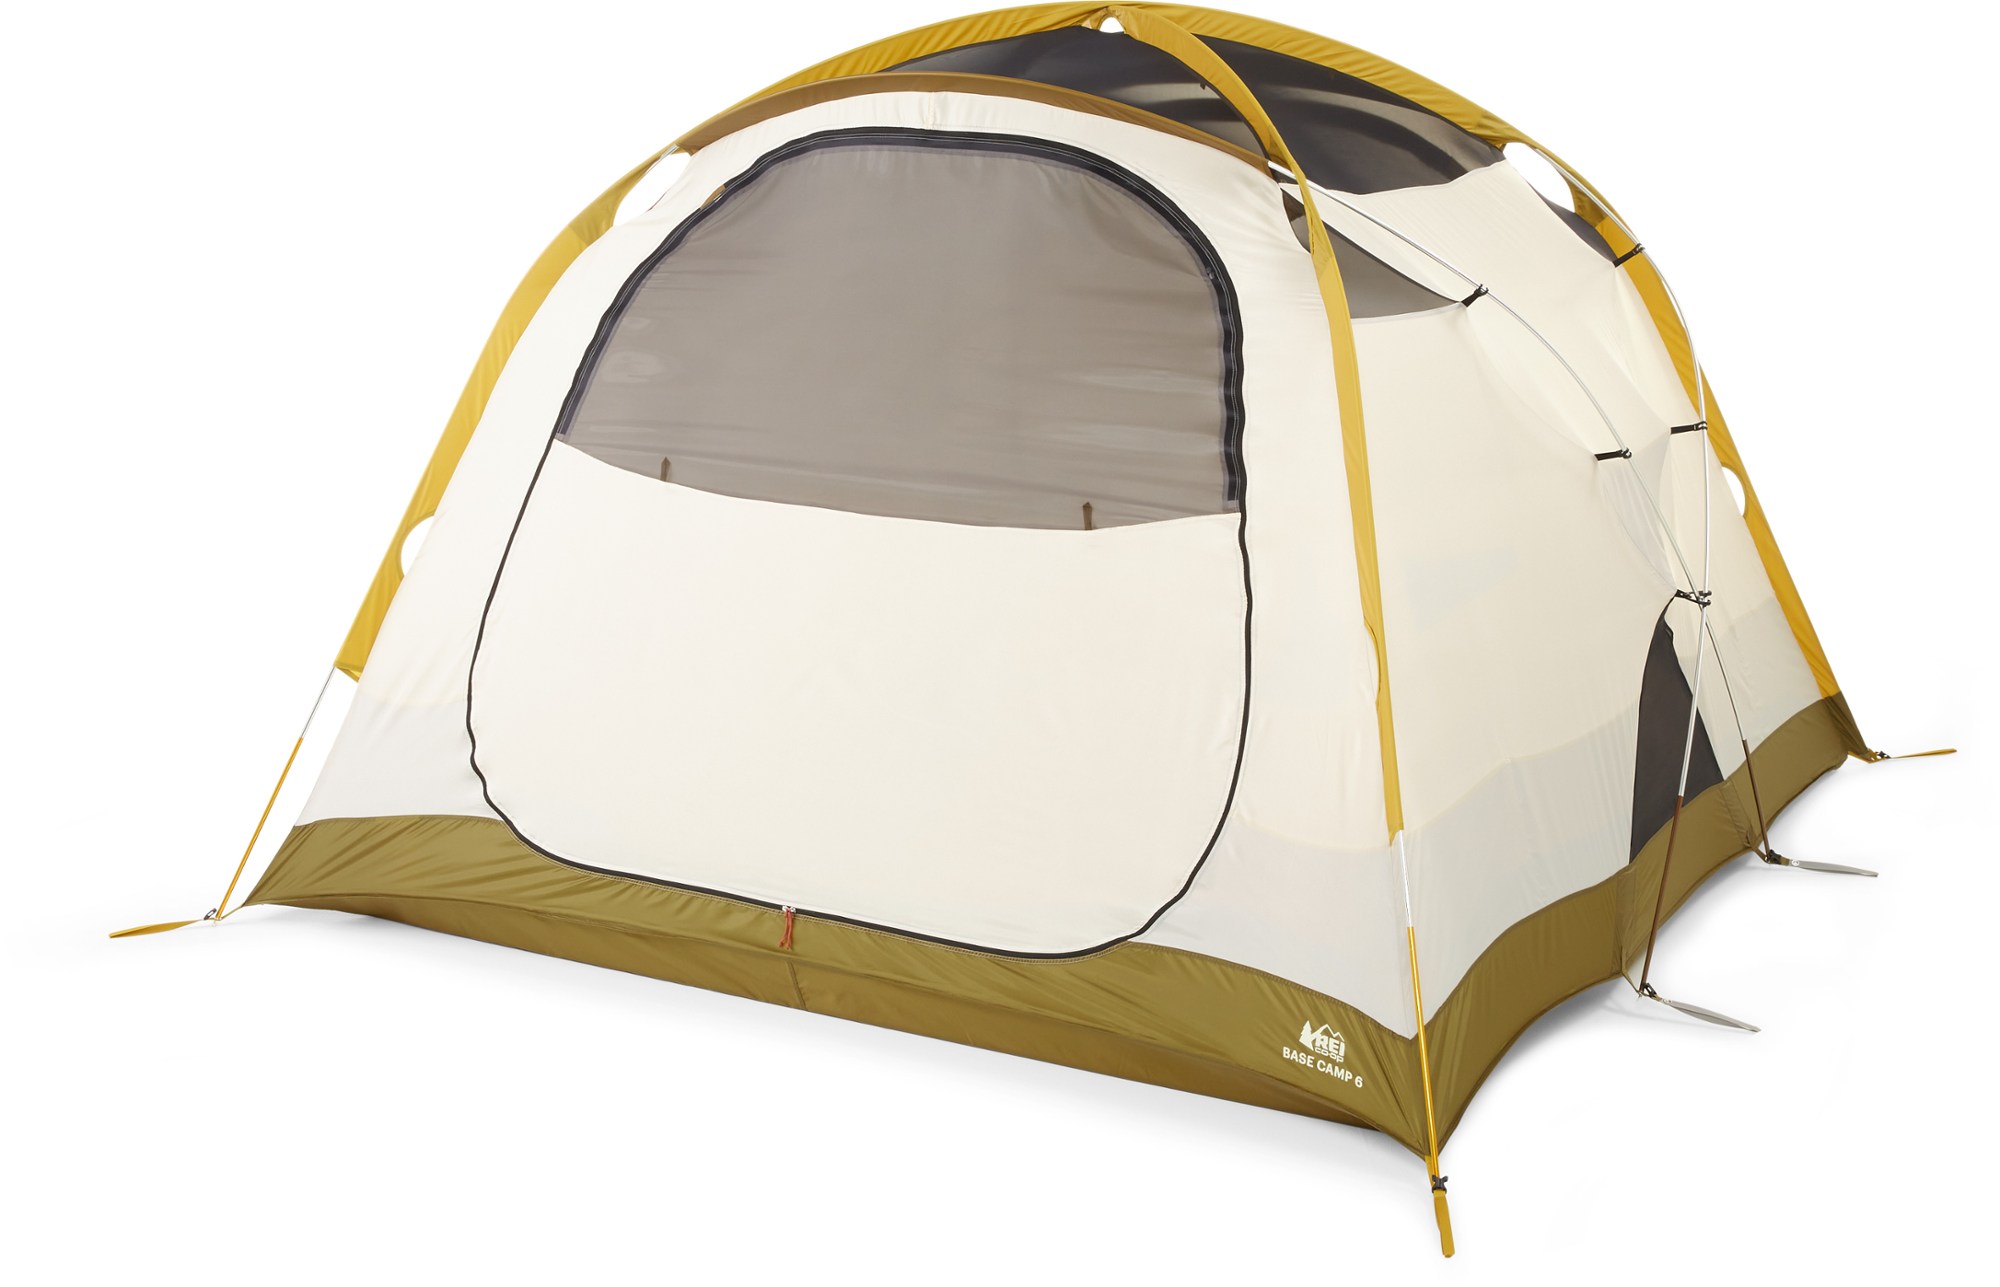 REI Co-op Base Camp 6 camping tent